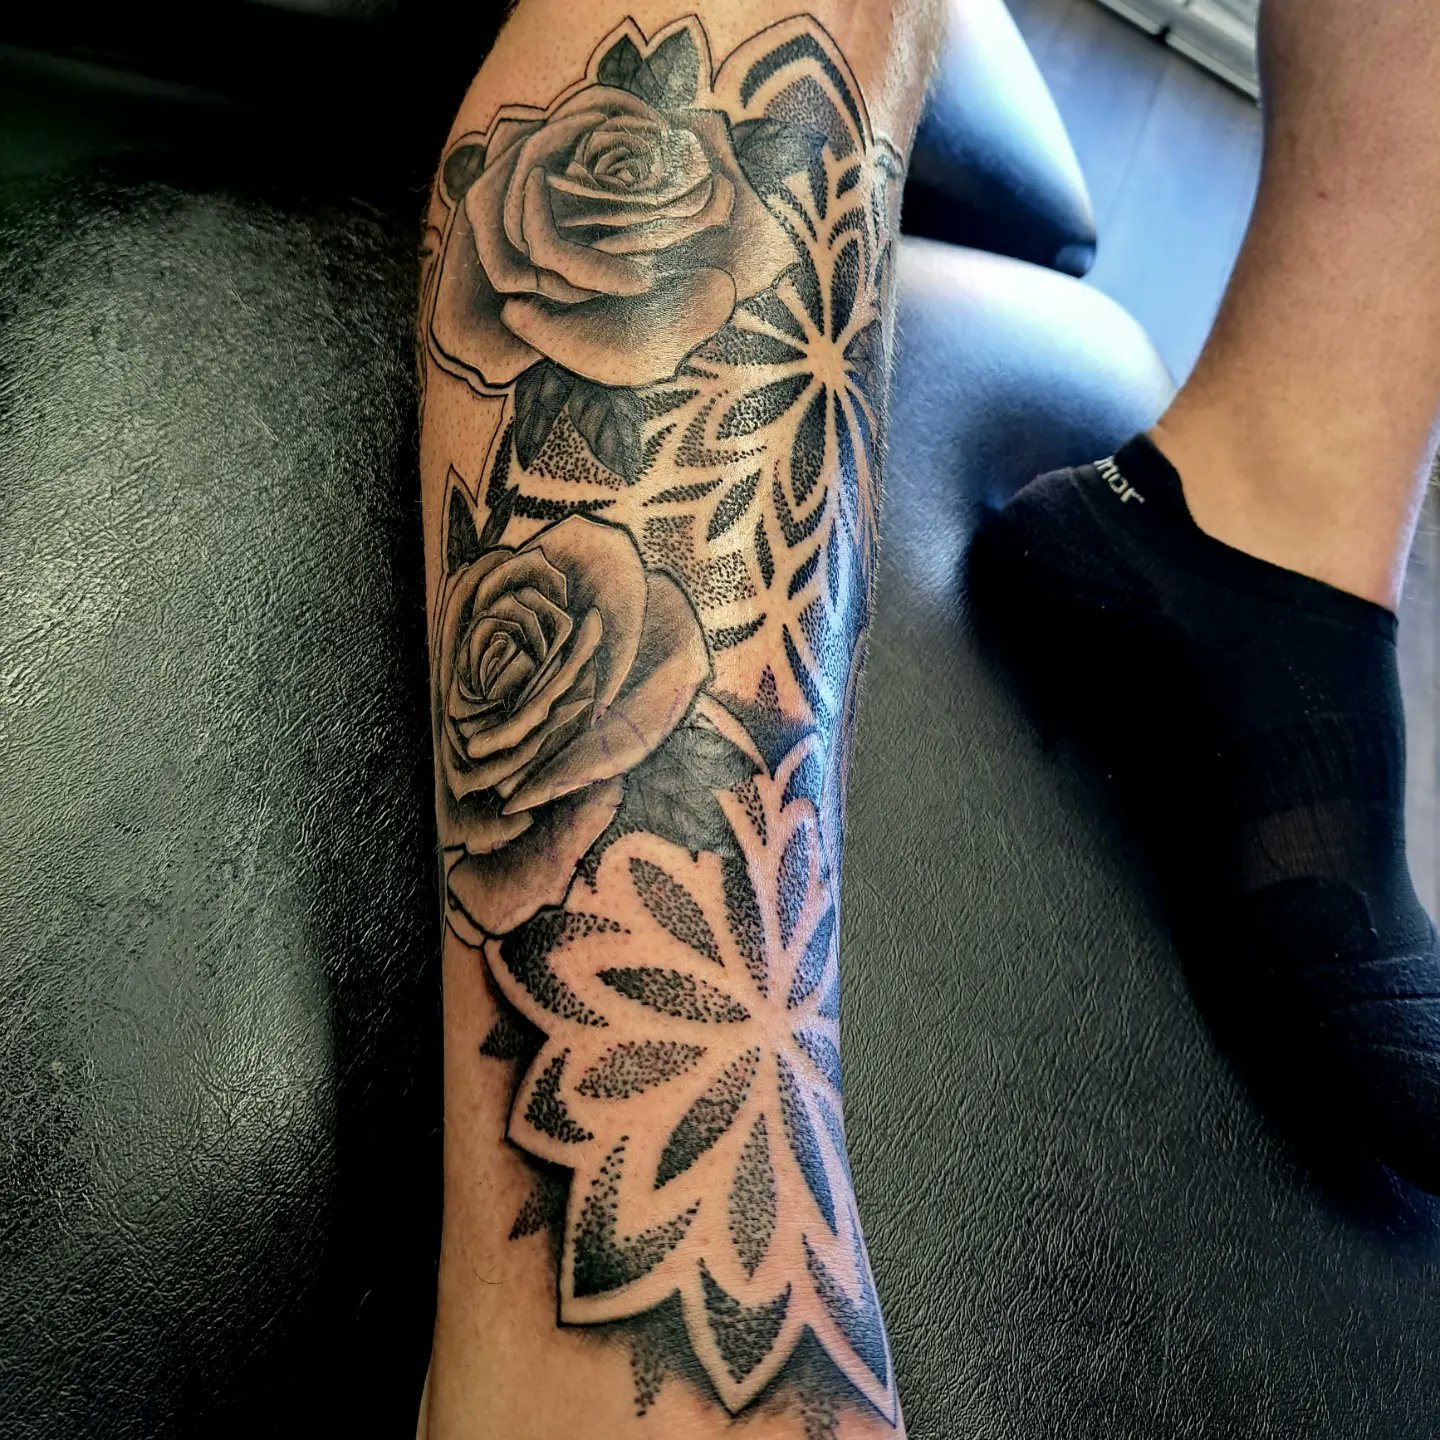 Peter Eccles on X: This mornings work added a smaller mandala